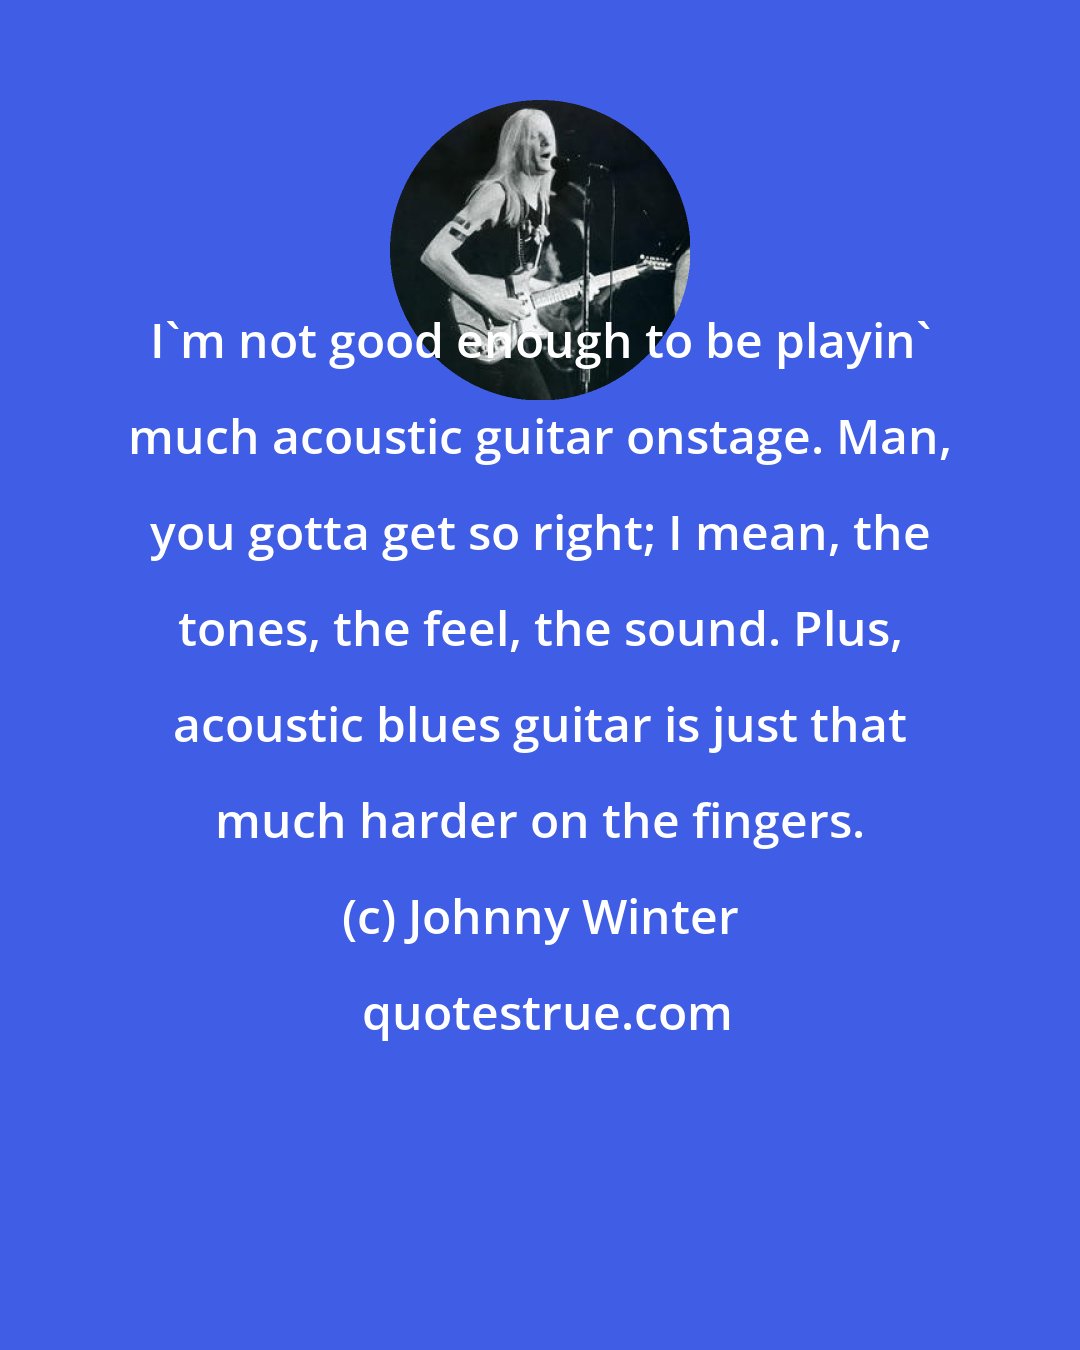 Johnny Winter: I'm not good enough to be playin' much acoustic guitar onstage. Man, you gotta get so right; I mean, the tones, the feel, the sound. Plus, acoustic blues guitar is just that much harder on the fingers.